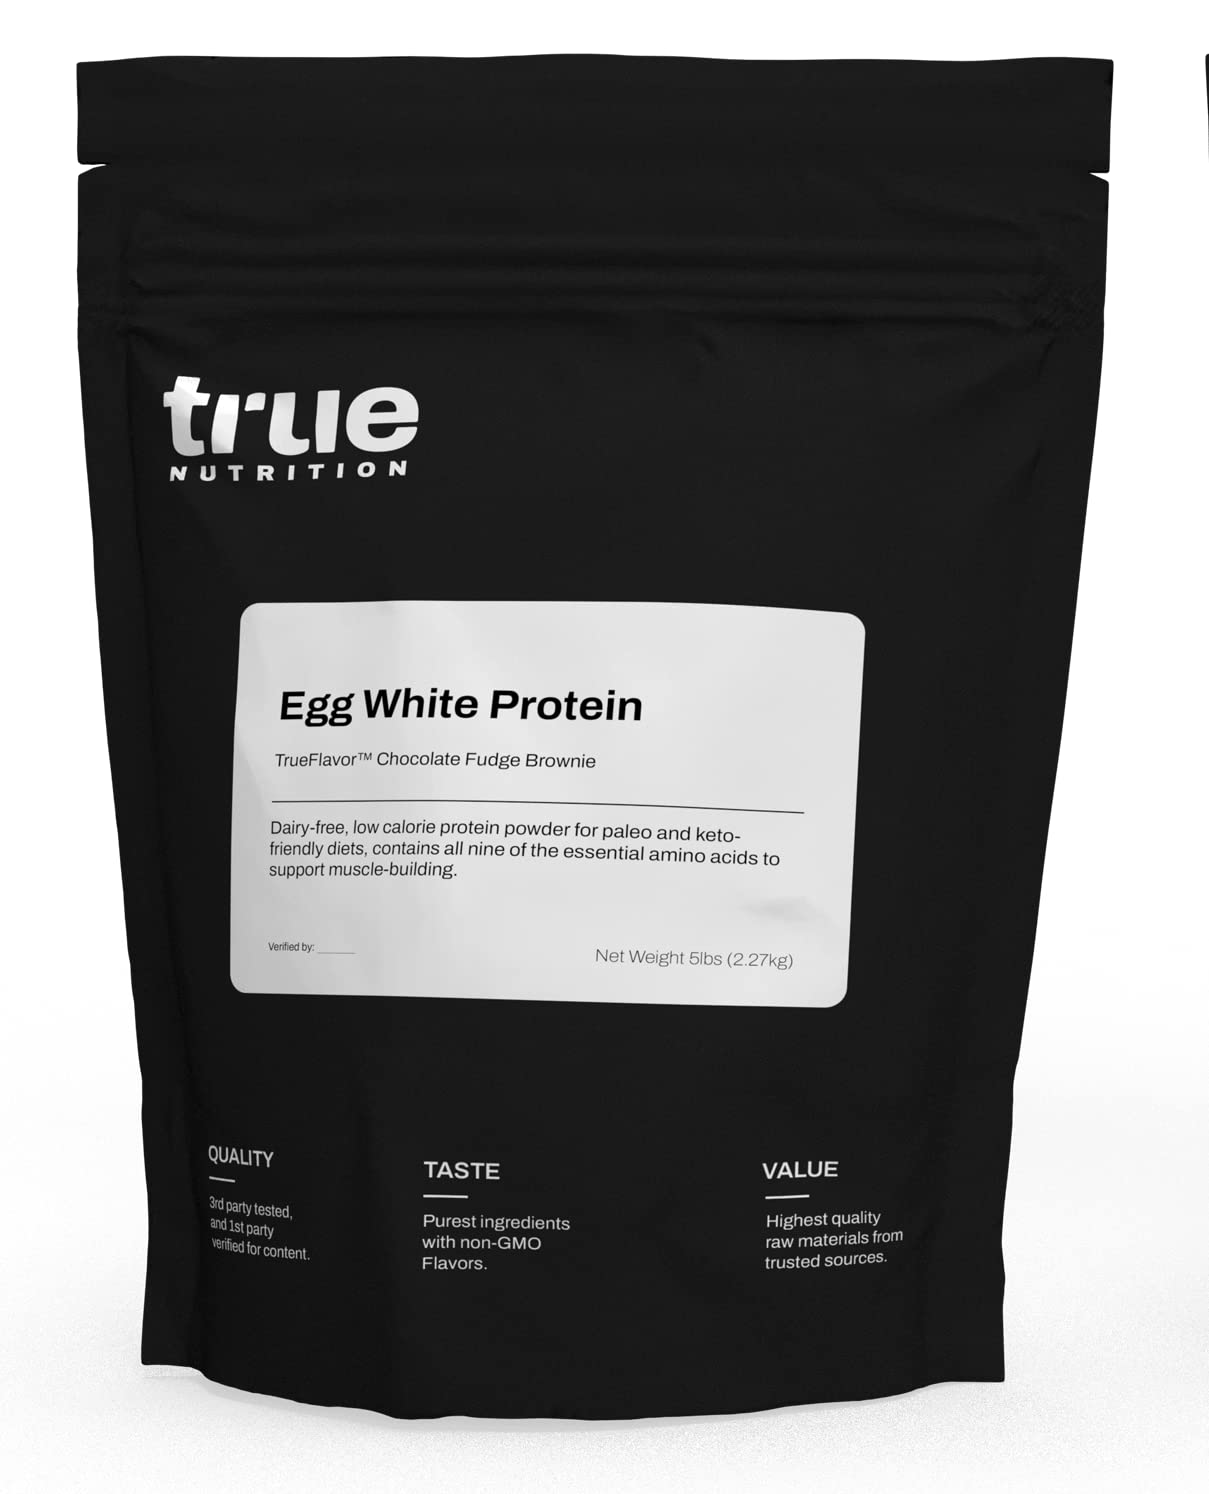 True Nutrition Egg White Protein Powder - 24g Non-GMO Egg Protein per Serving - Low Carb, Low Fat, Paleo, Keto, Gluten Free, Dairy Free, Soy Free - Chocolate Fudge Brownie - 5LB